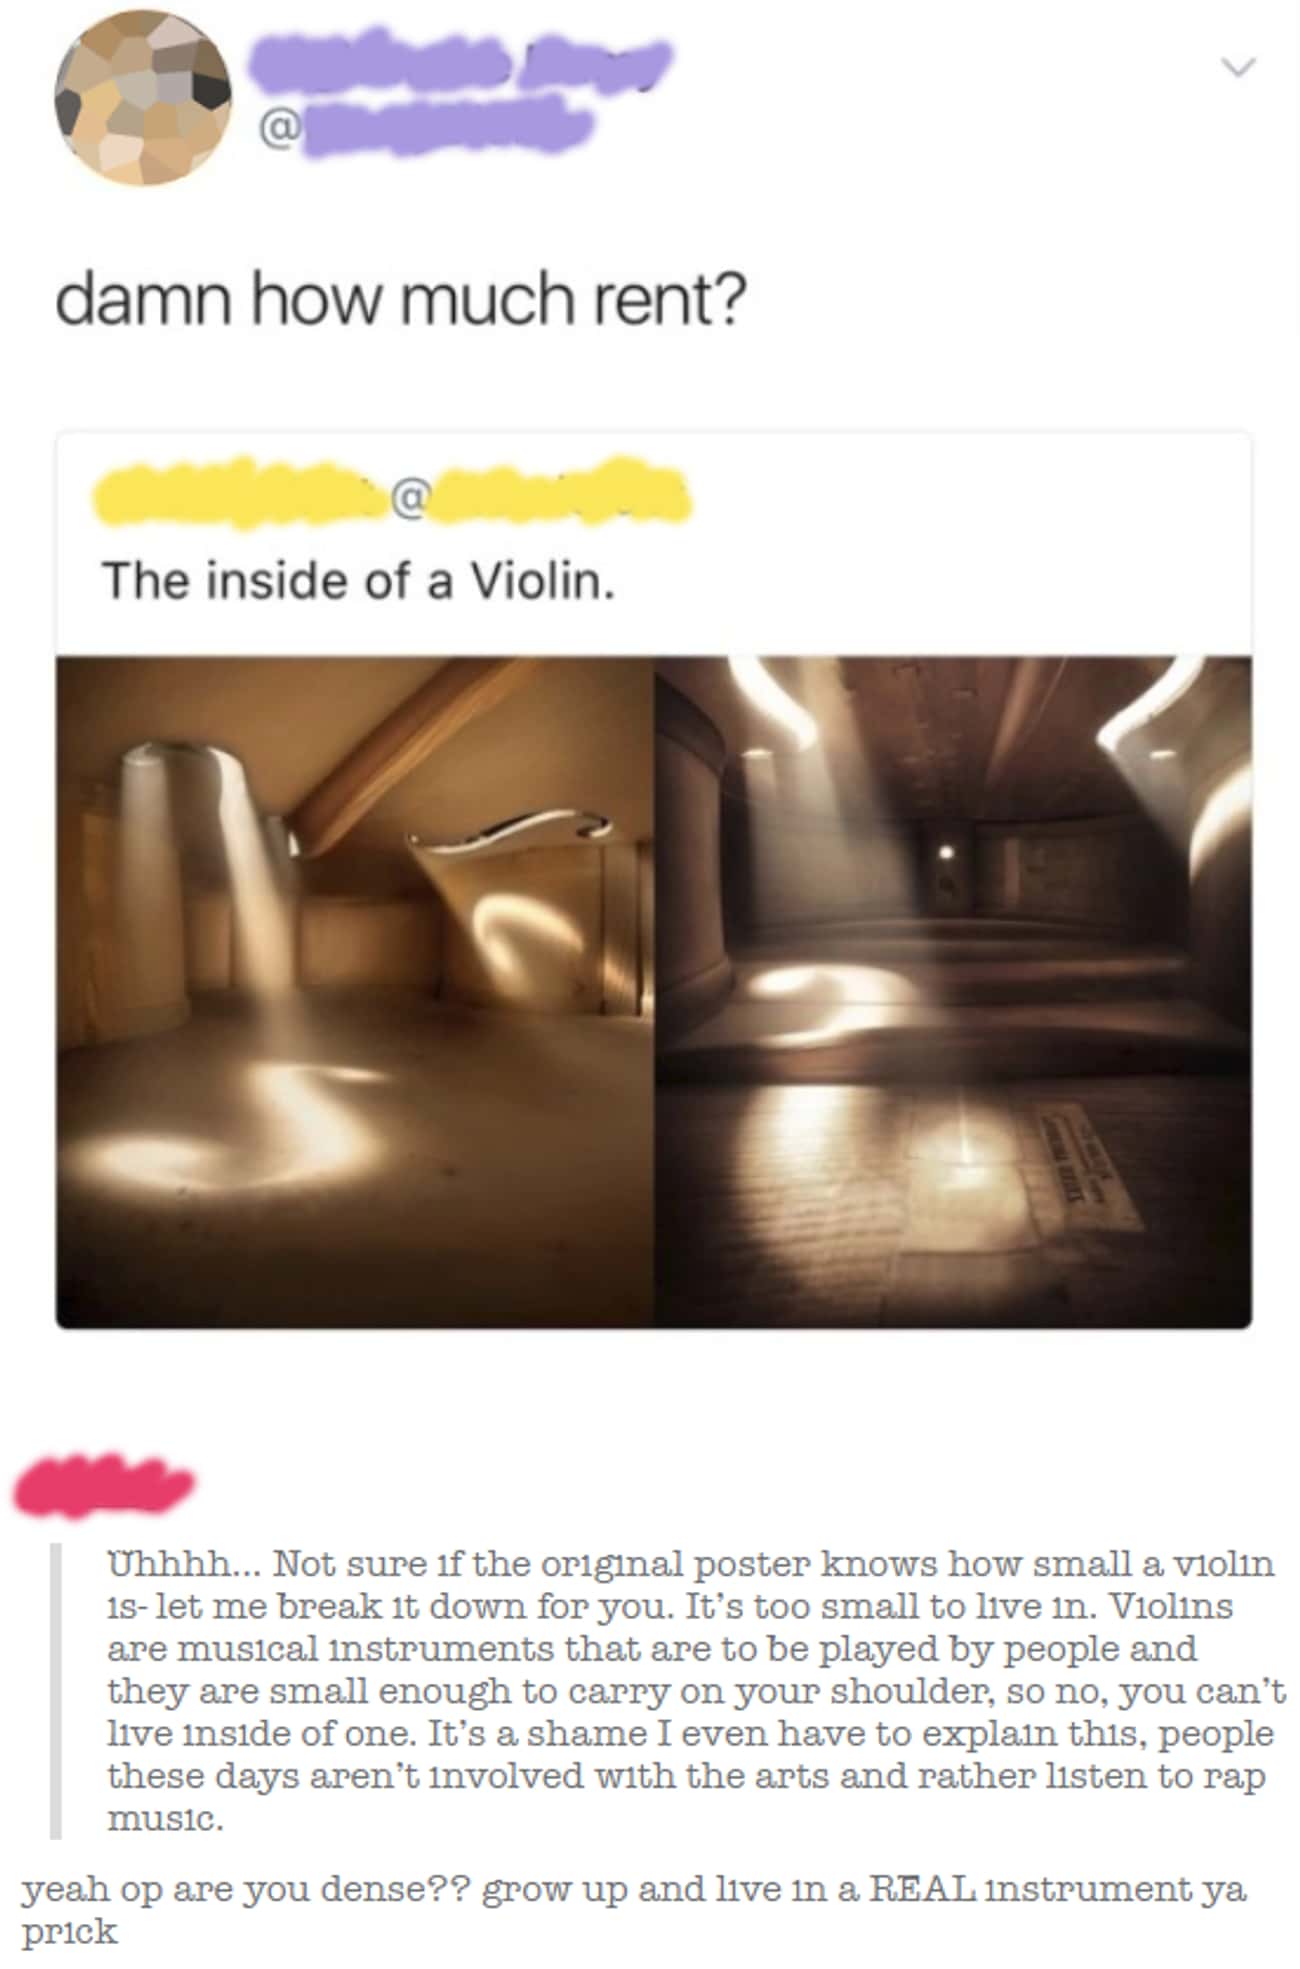 Not Sure If They Know, But You Can't Actually Live In A Violin